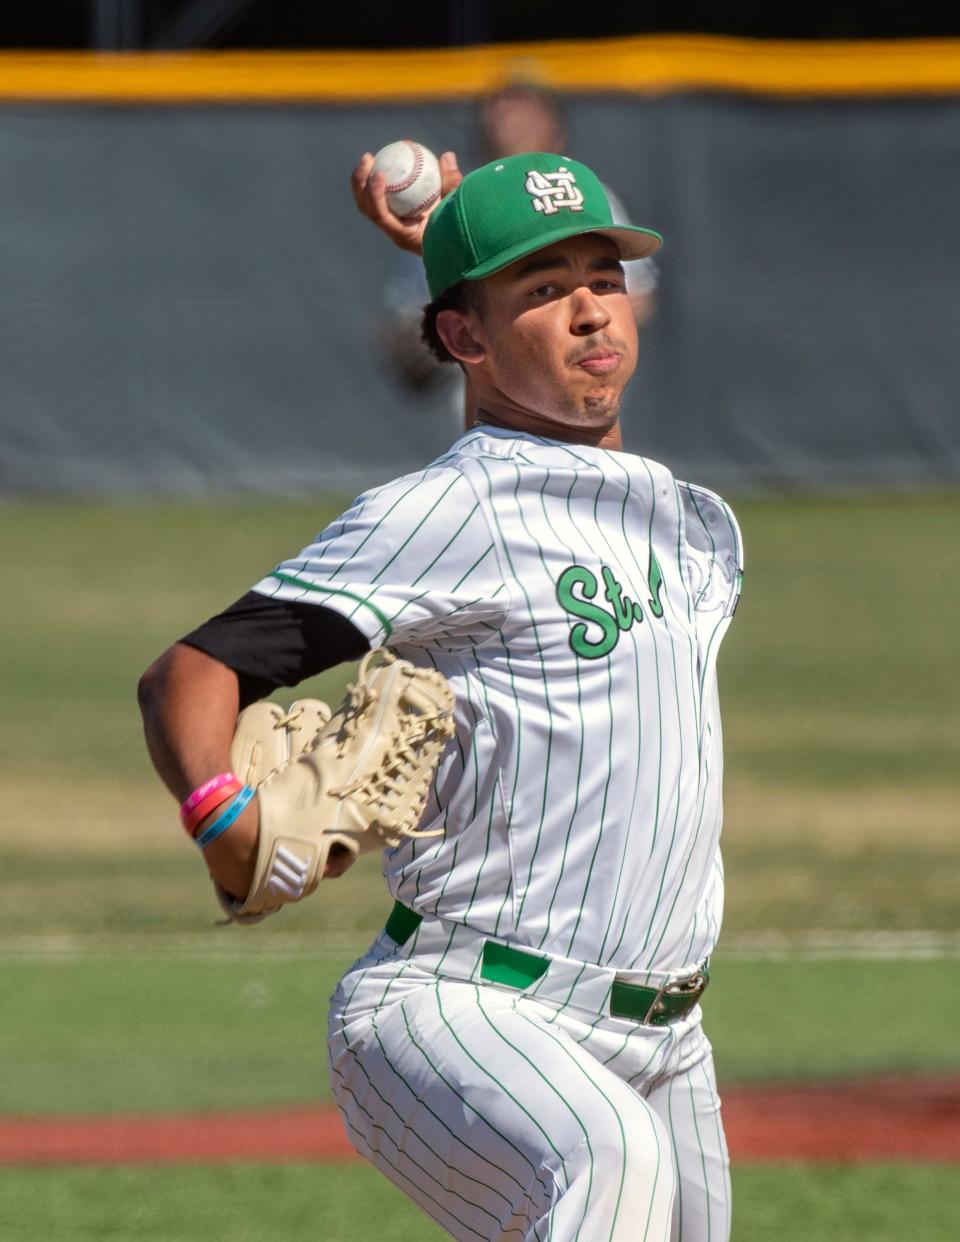 St. Mary's Michael Quedens delivers a pitch during a varsity baseball game against Lincoln at St. Mary's in Stockton on May 3, 2023.